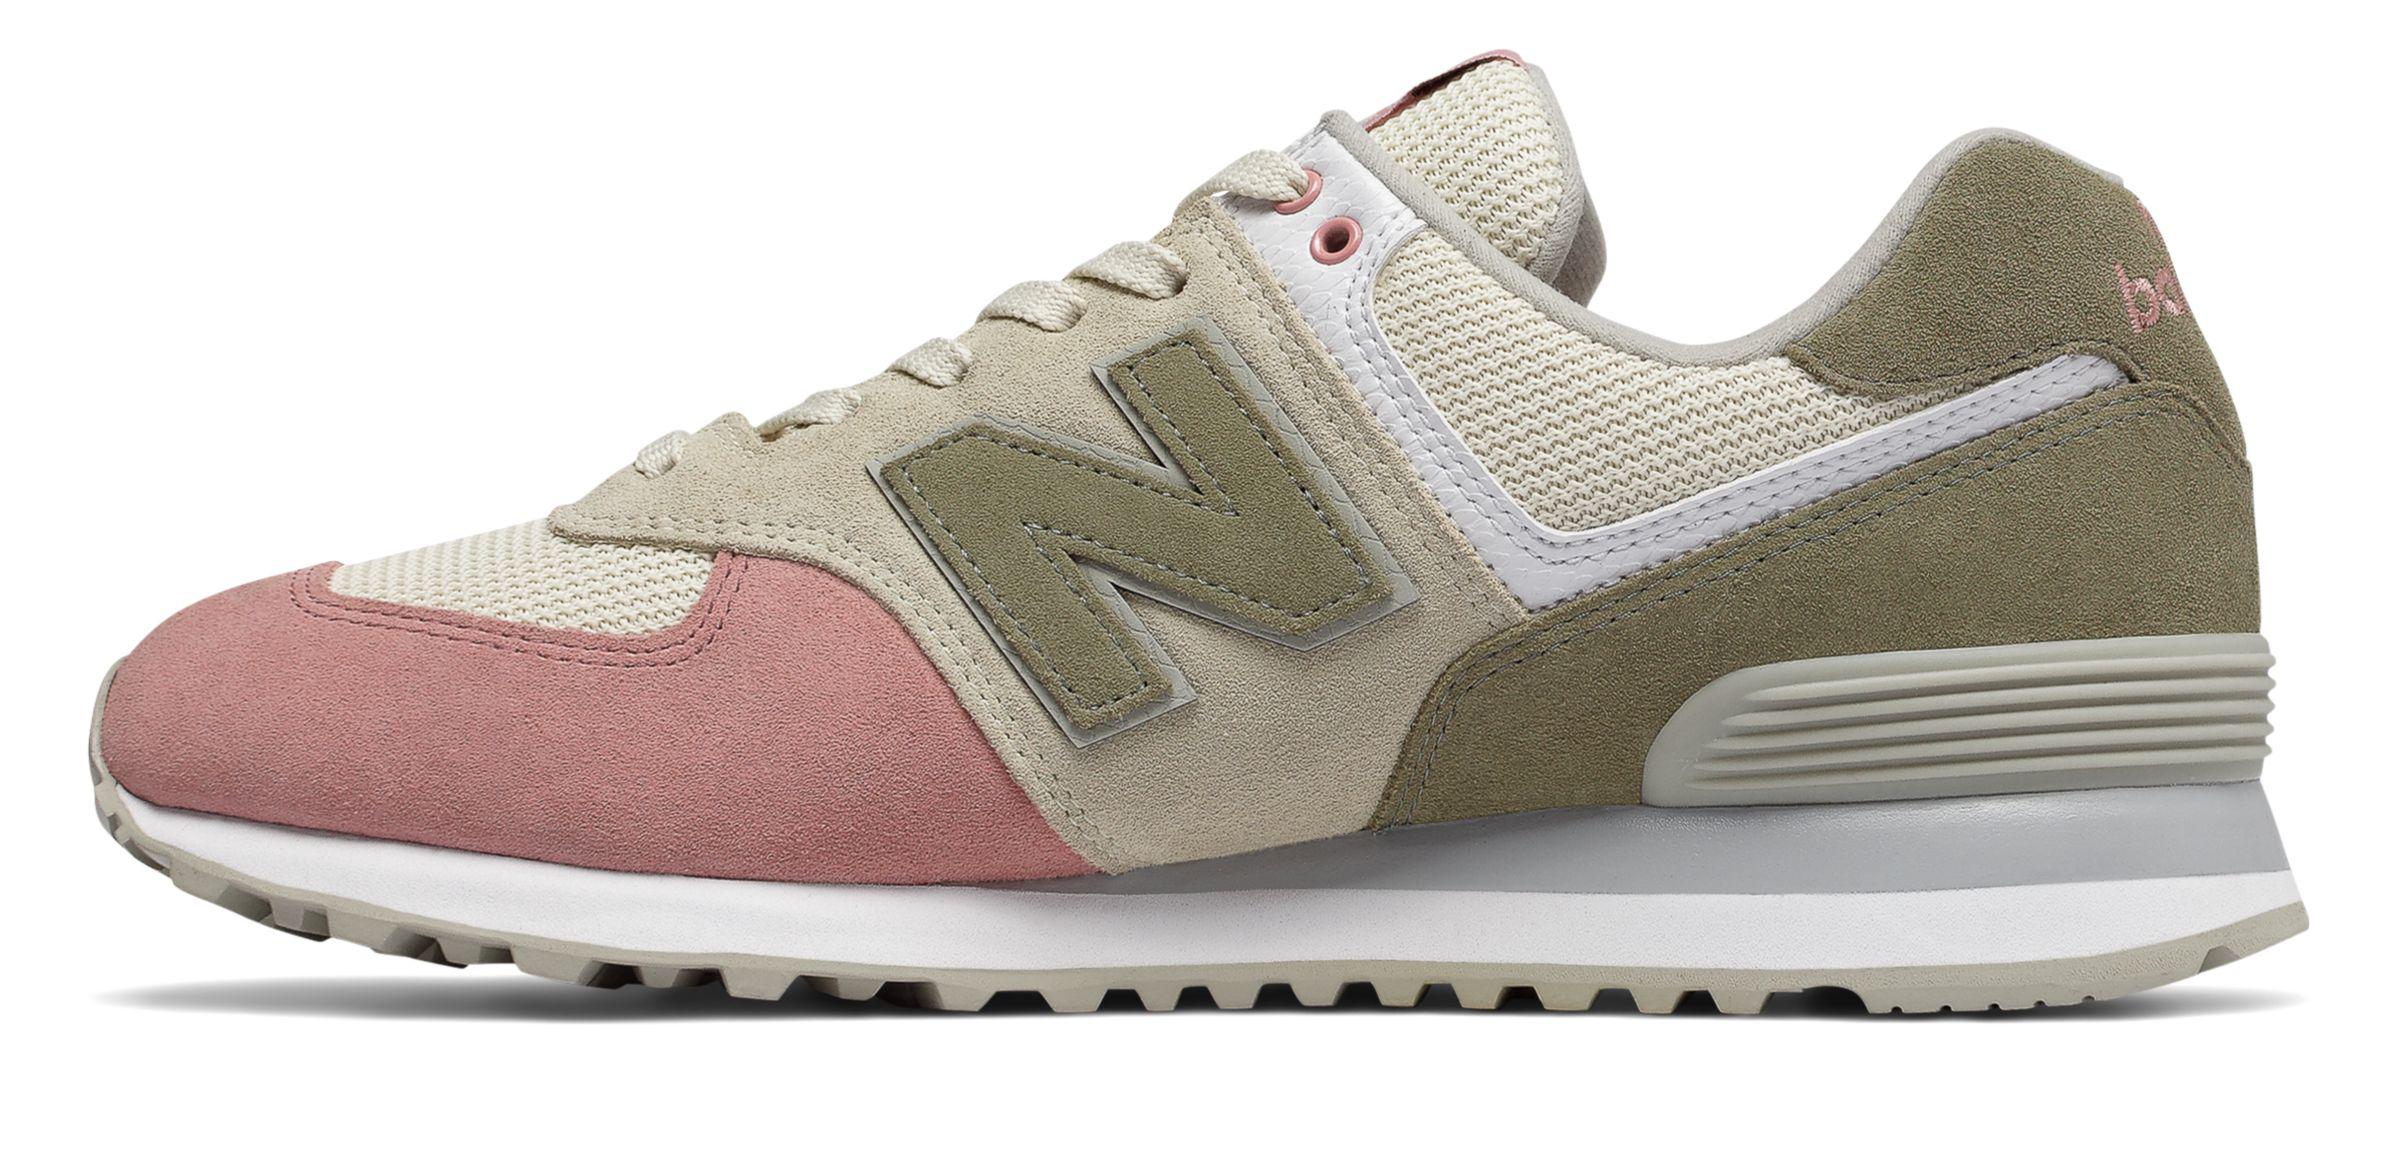 Shop > new balance serpent luxe 574 > at lowest prices